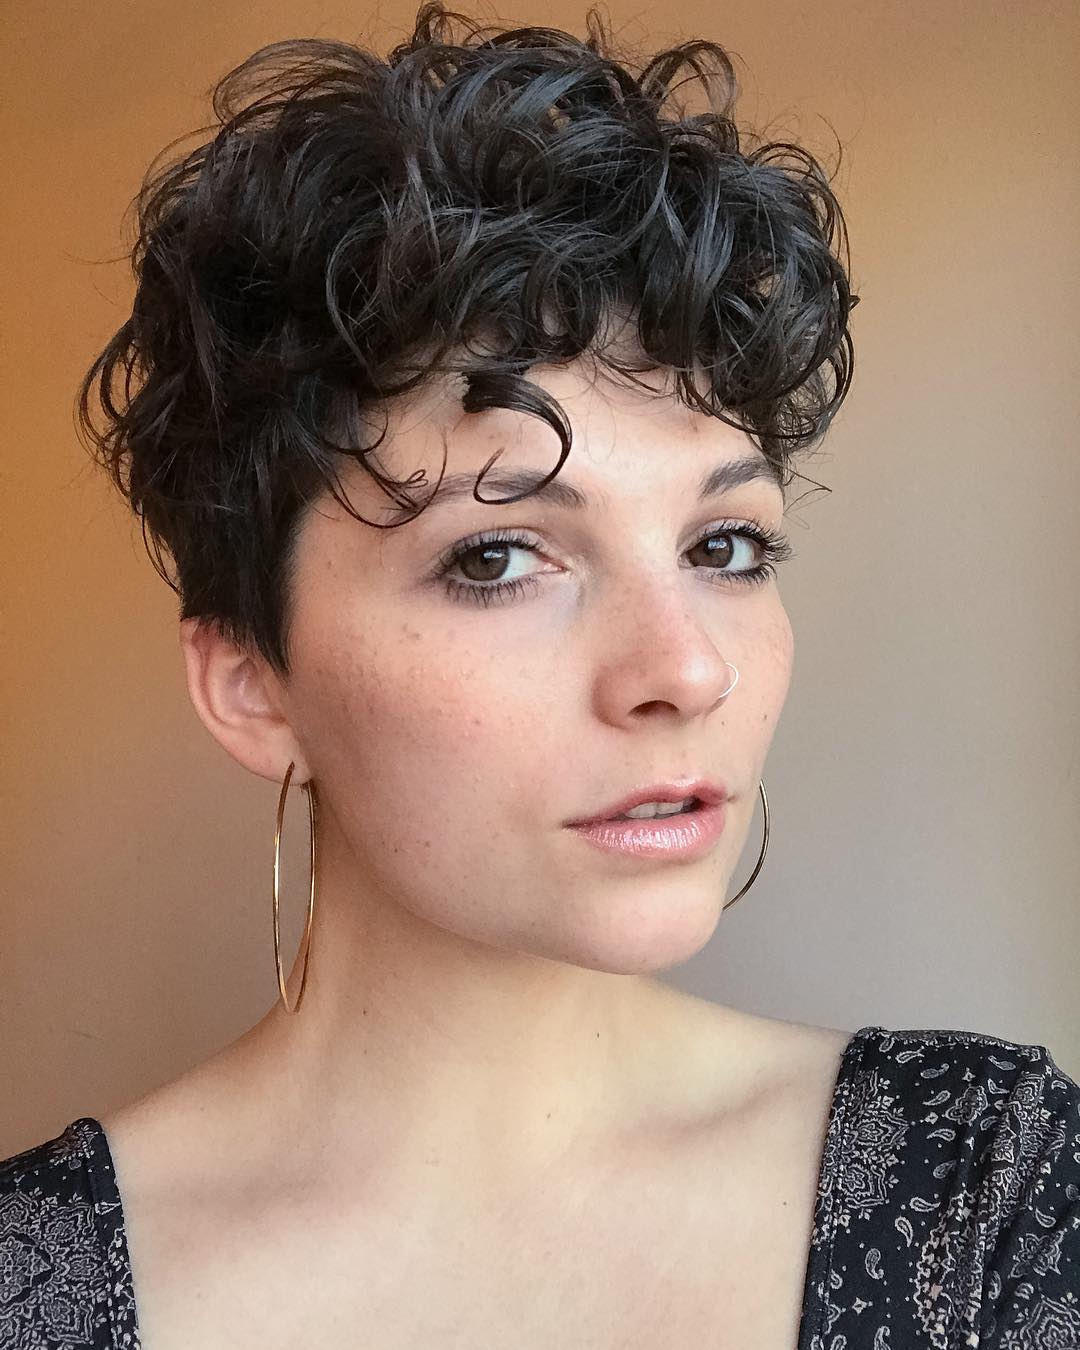 Messy pixie cut from esther.itterly